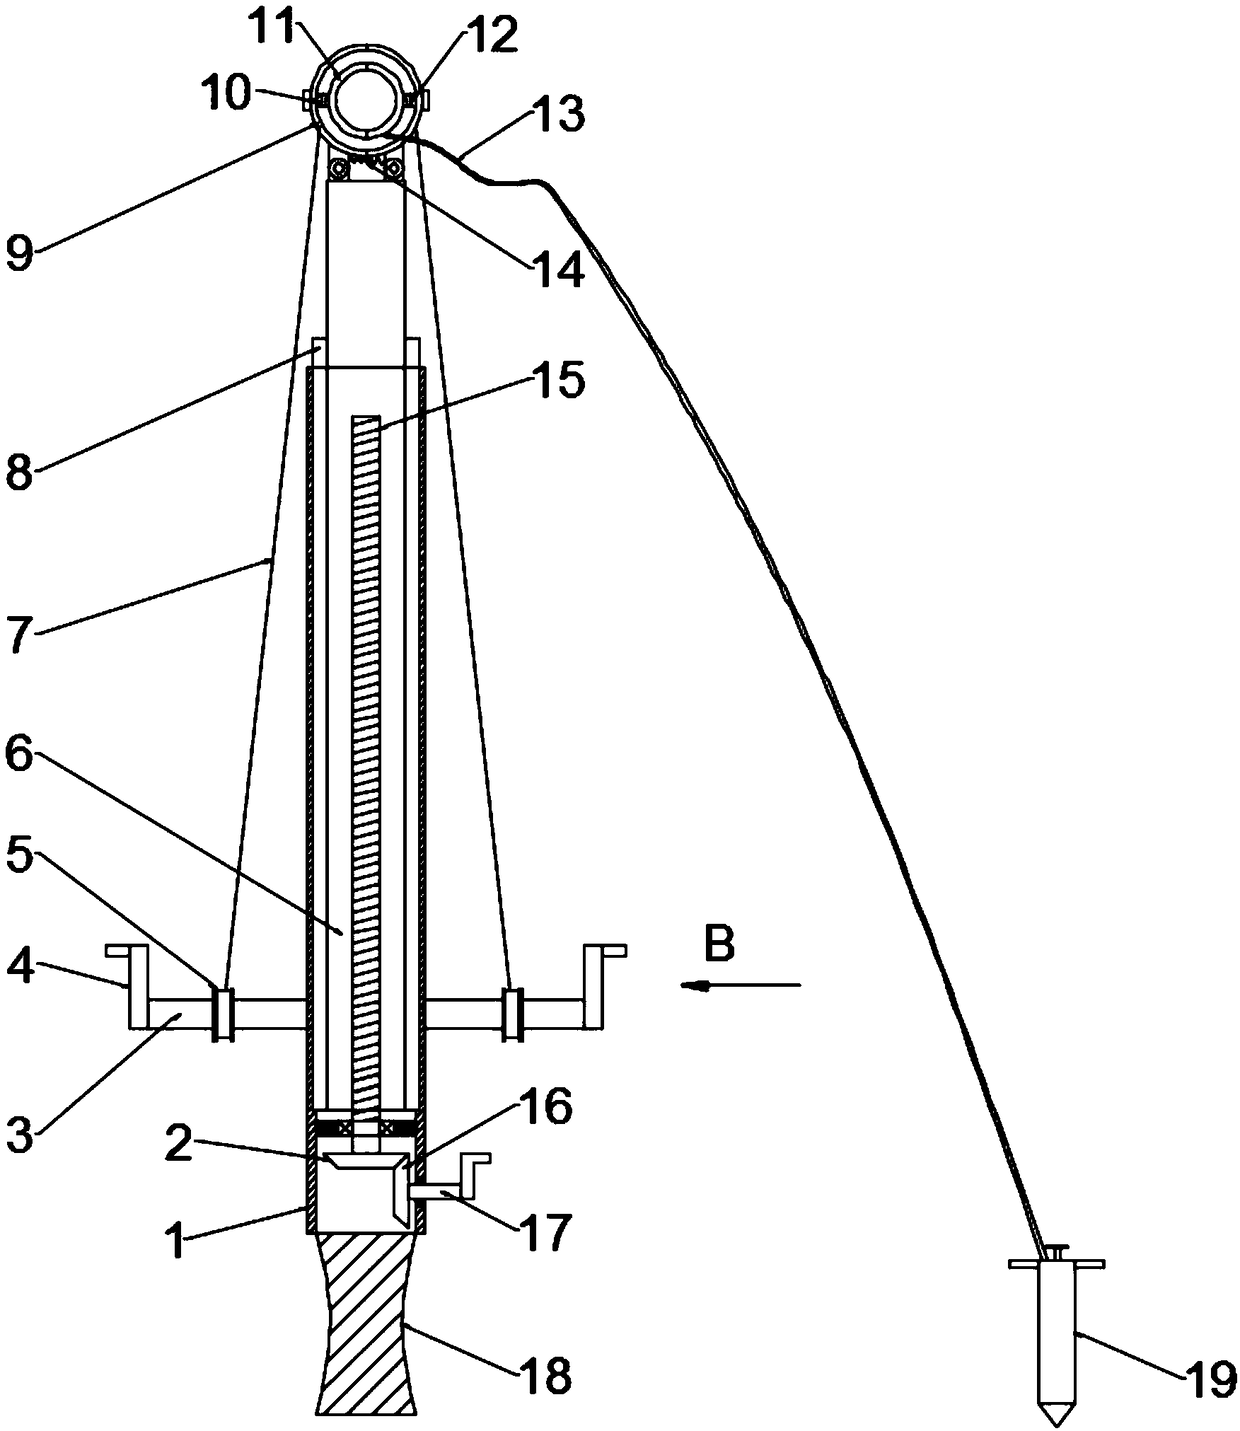 Grounding line device for maintenance of power transmission line in power engineering